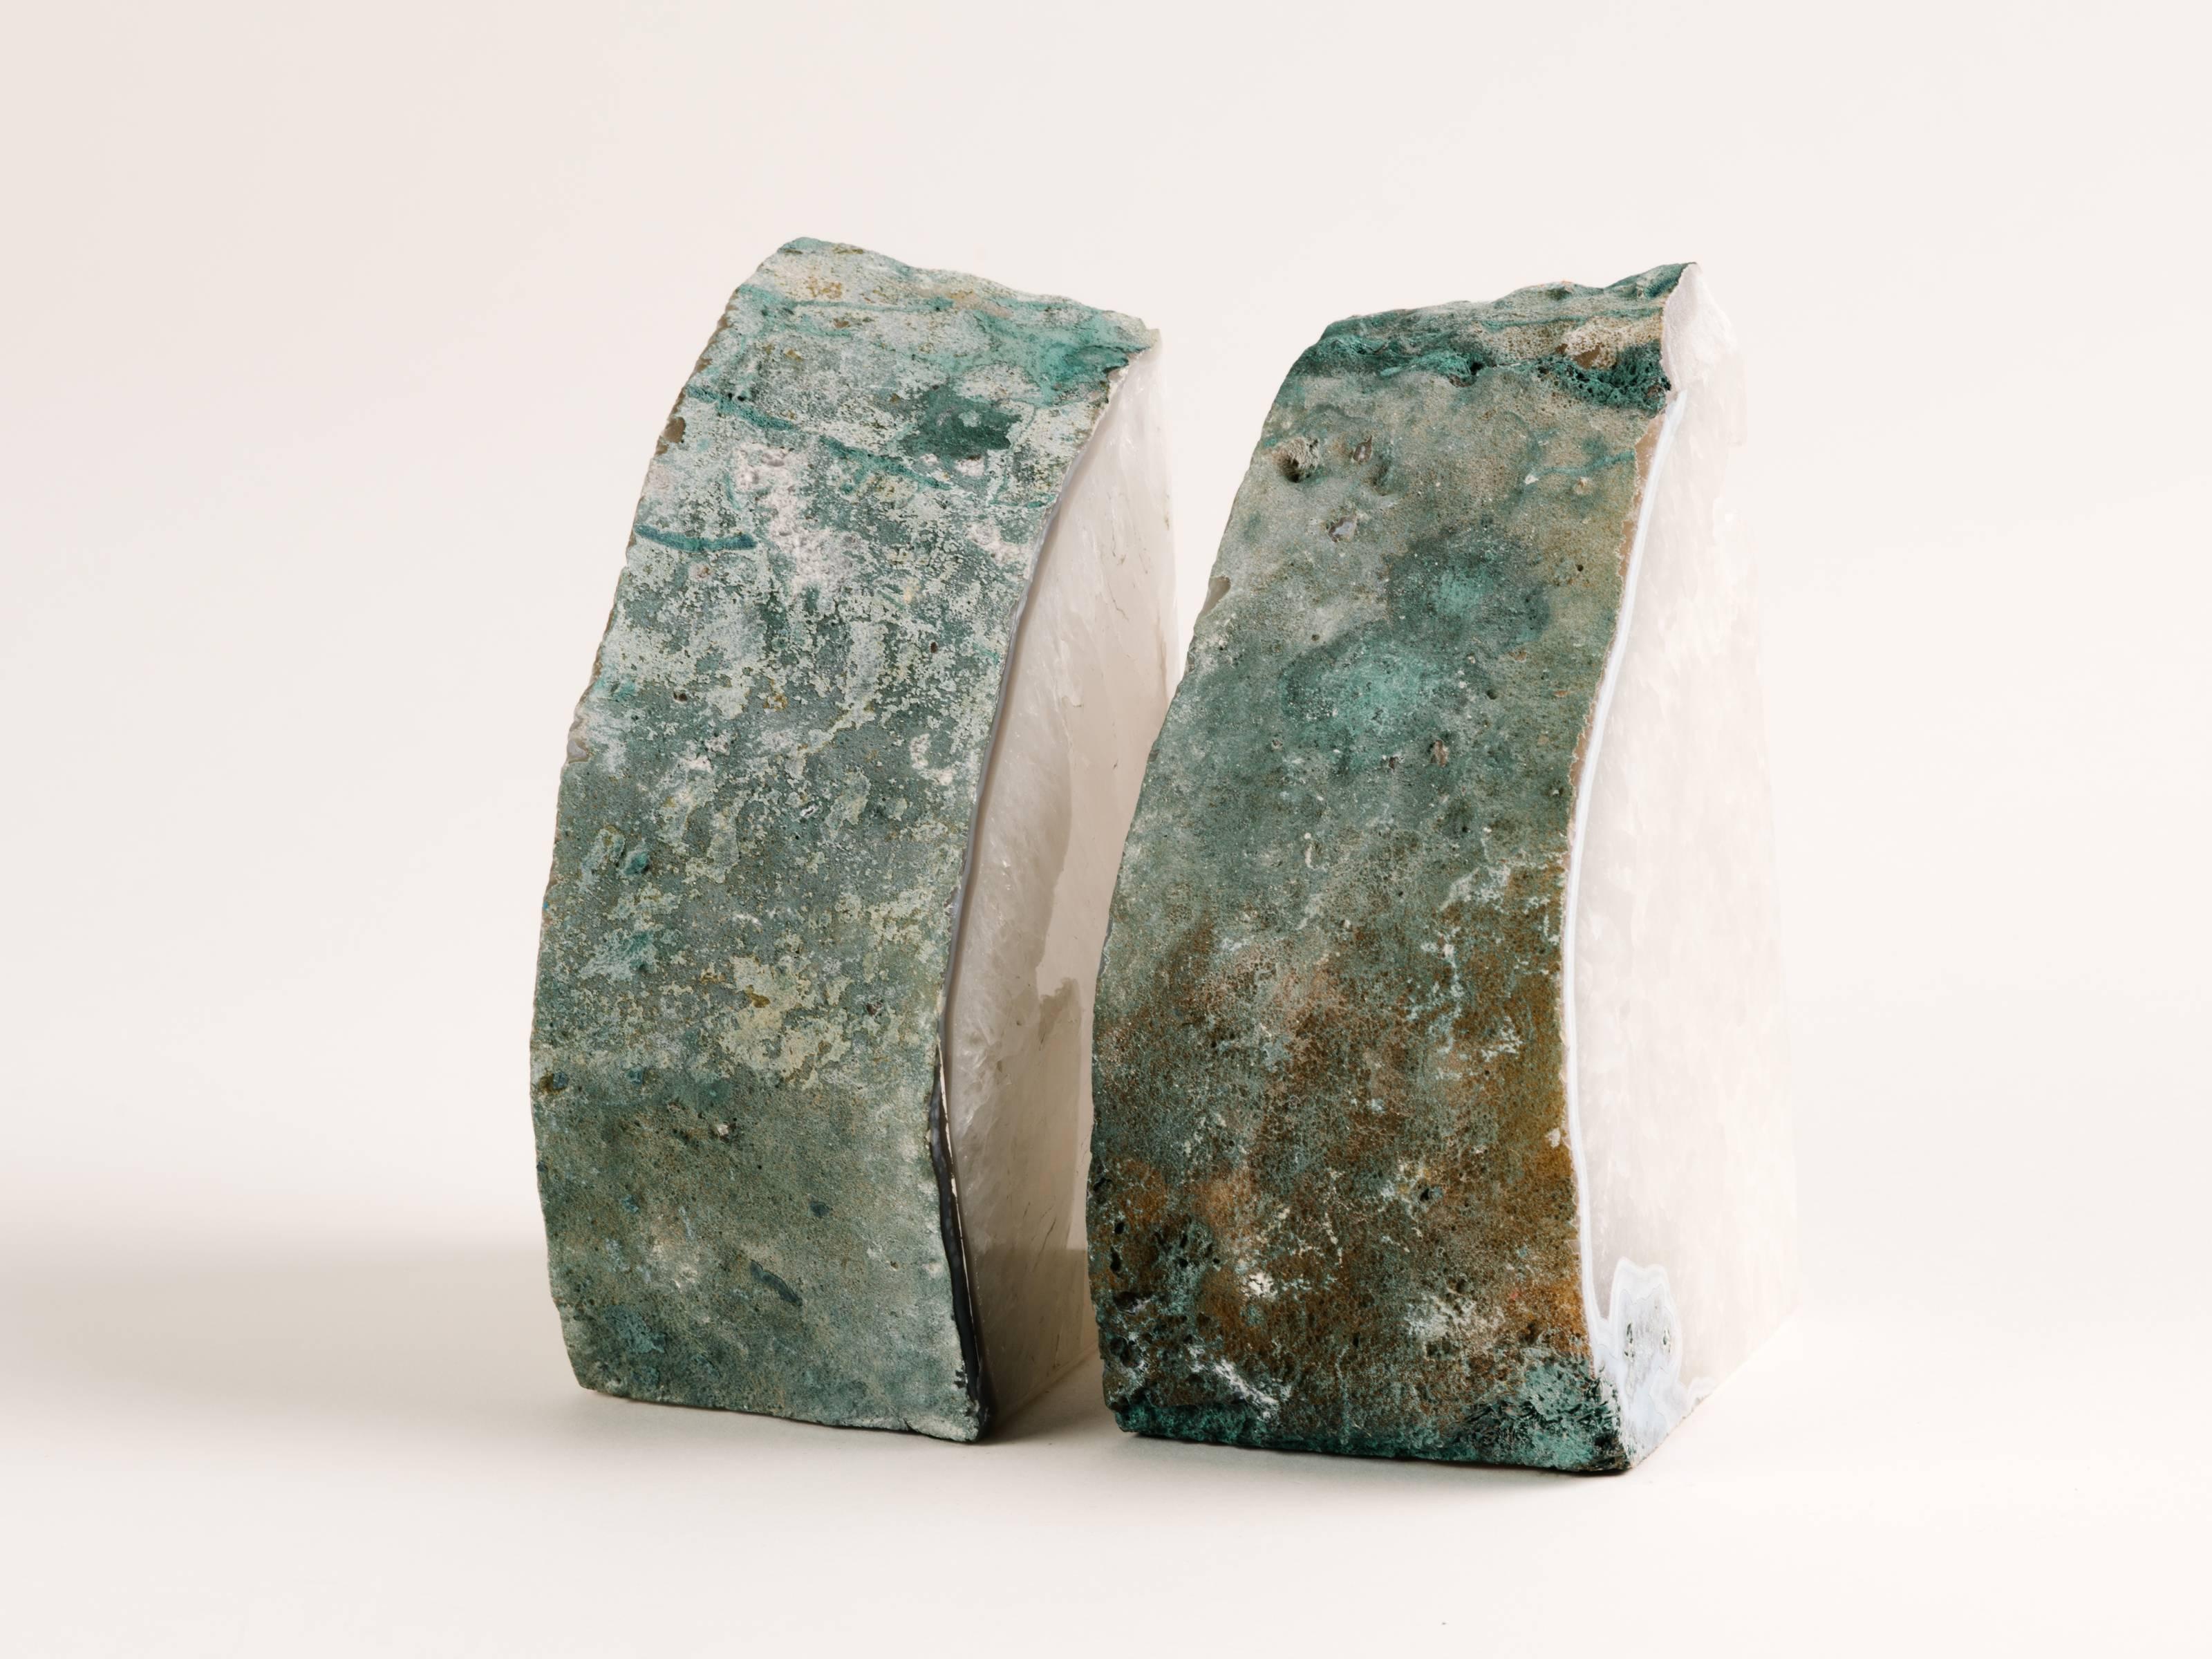 Pair of Chunky Quartz Crystal Bookends with Oxidized Green Edges 2